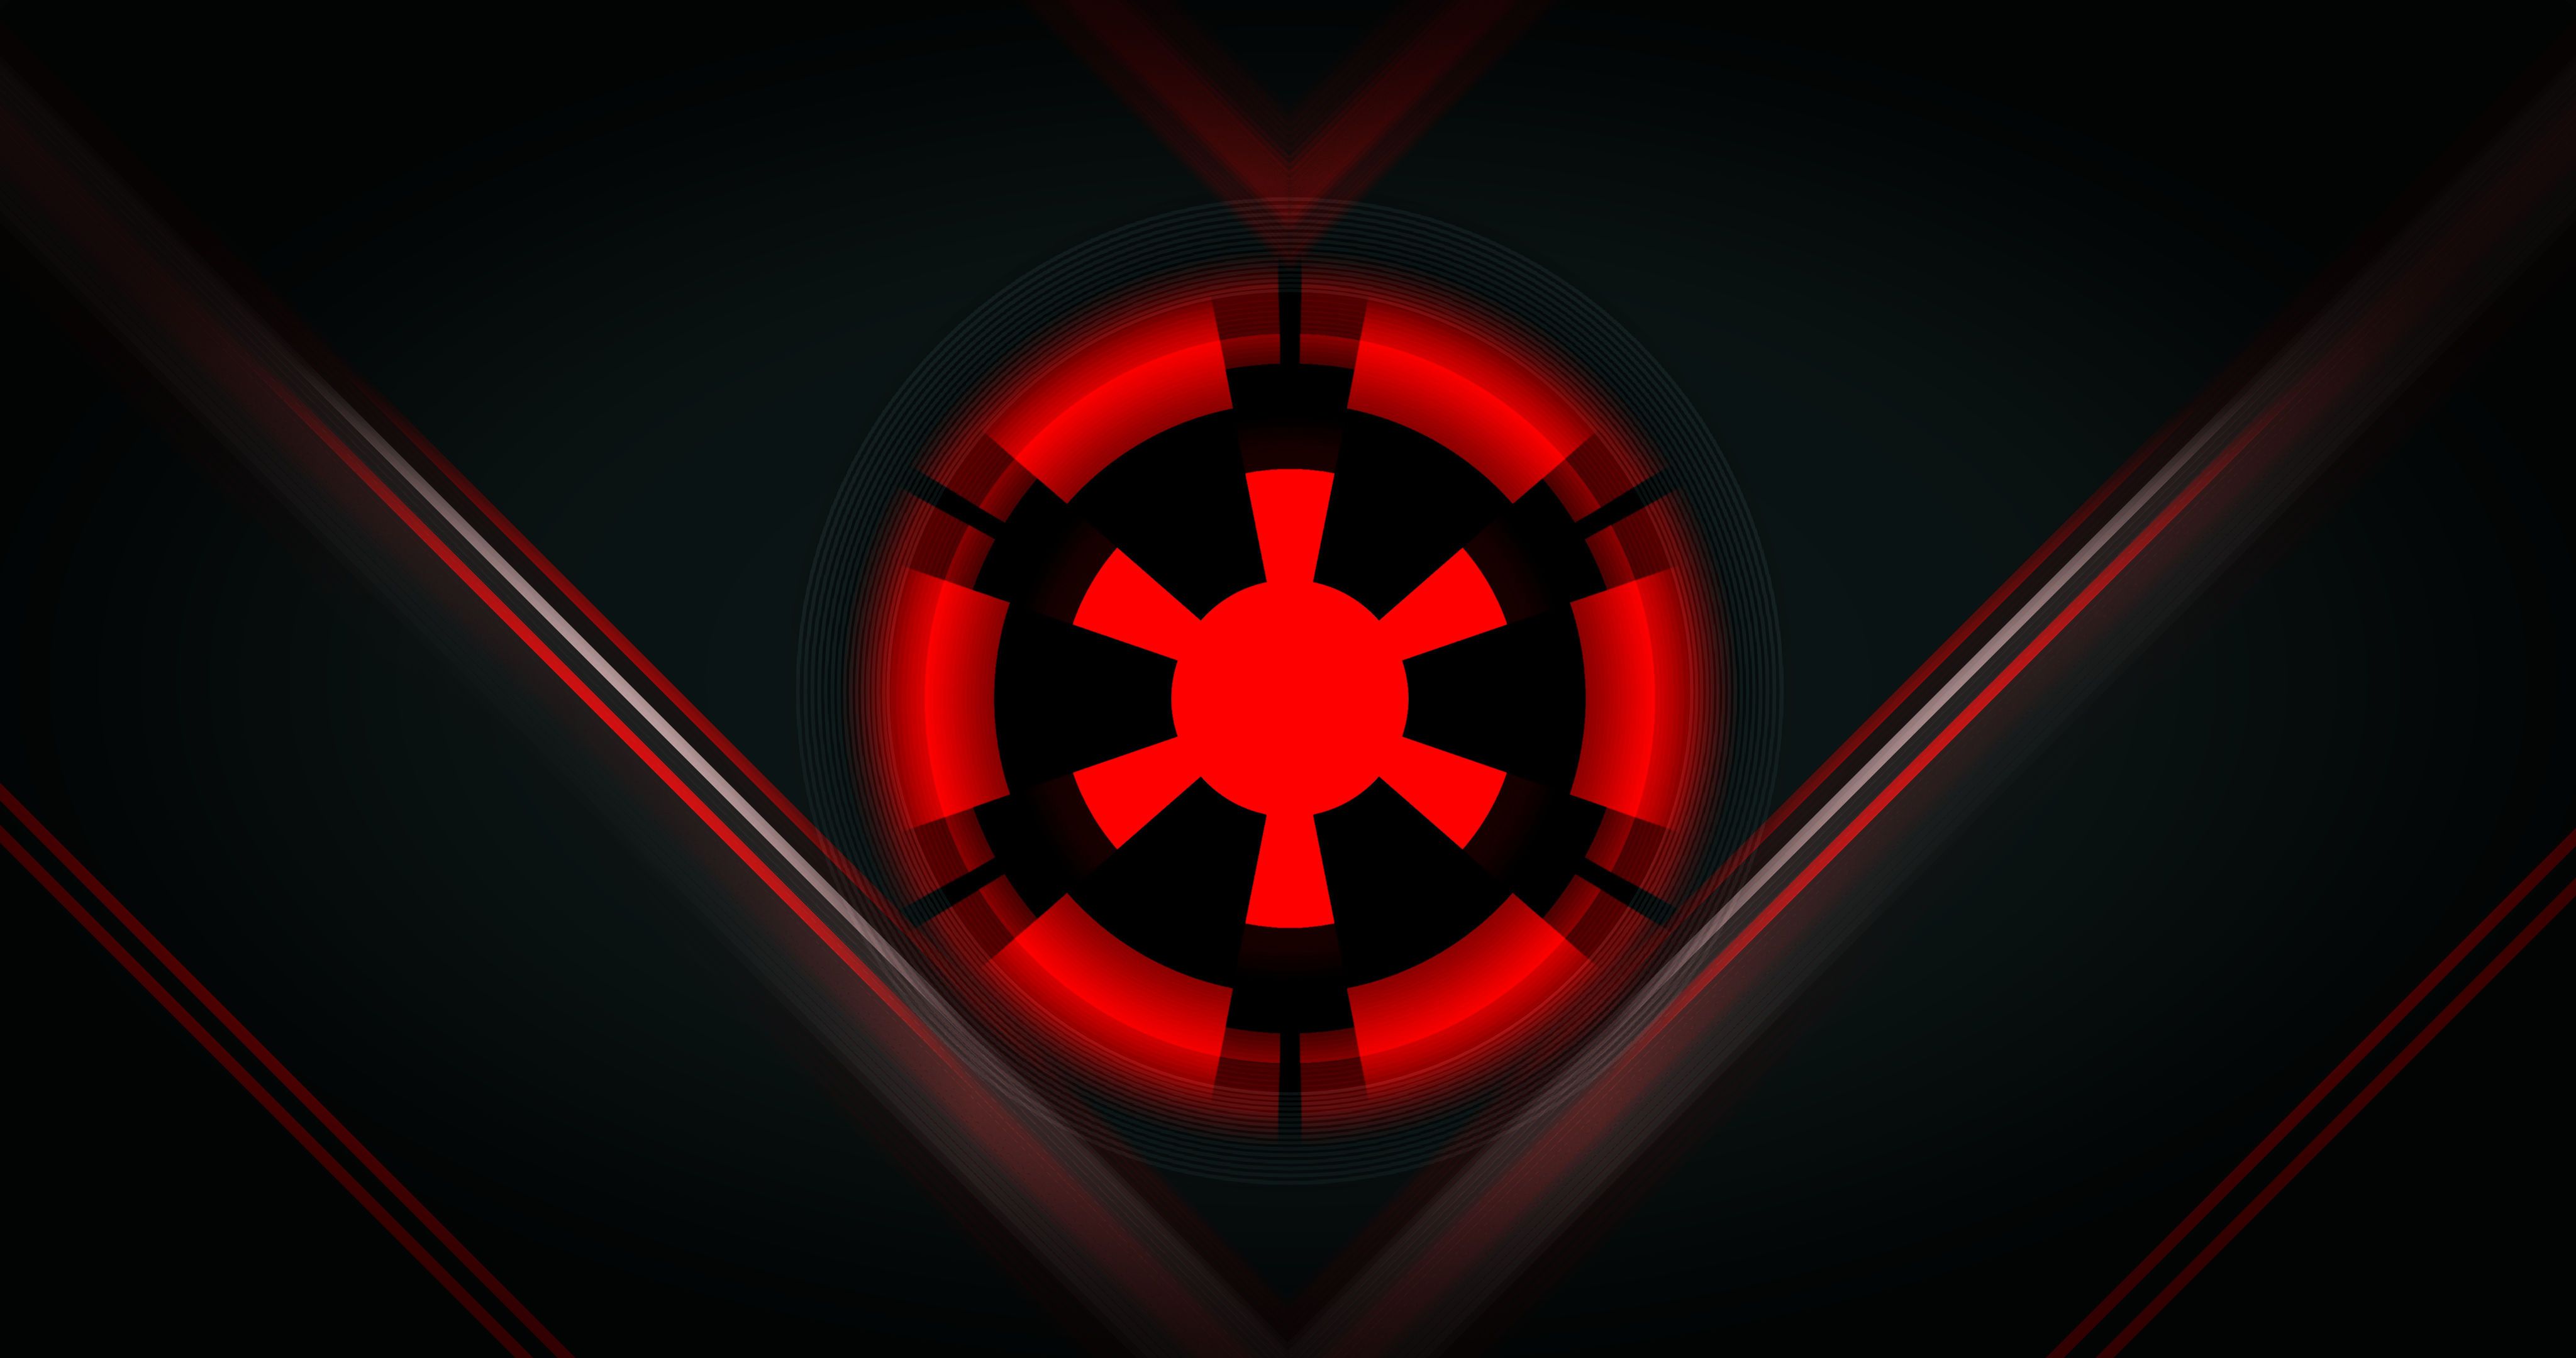 Galactic empire desktop wallpaper, let me know what you think in the comments!